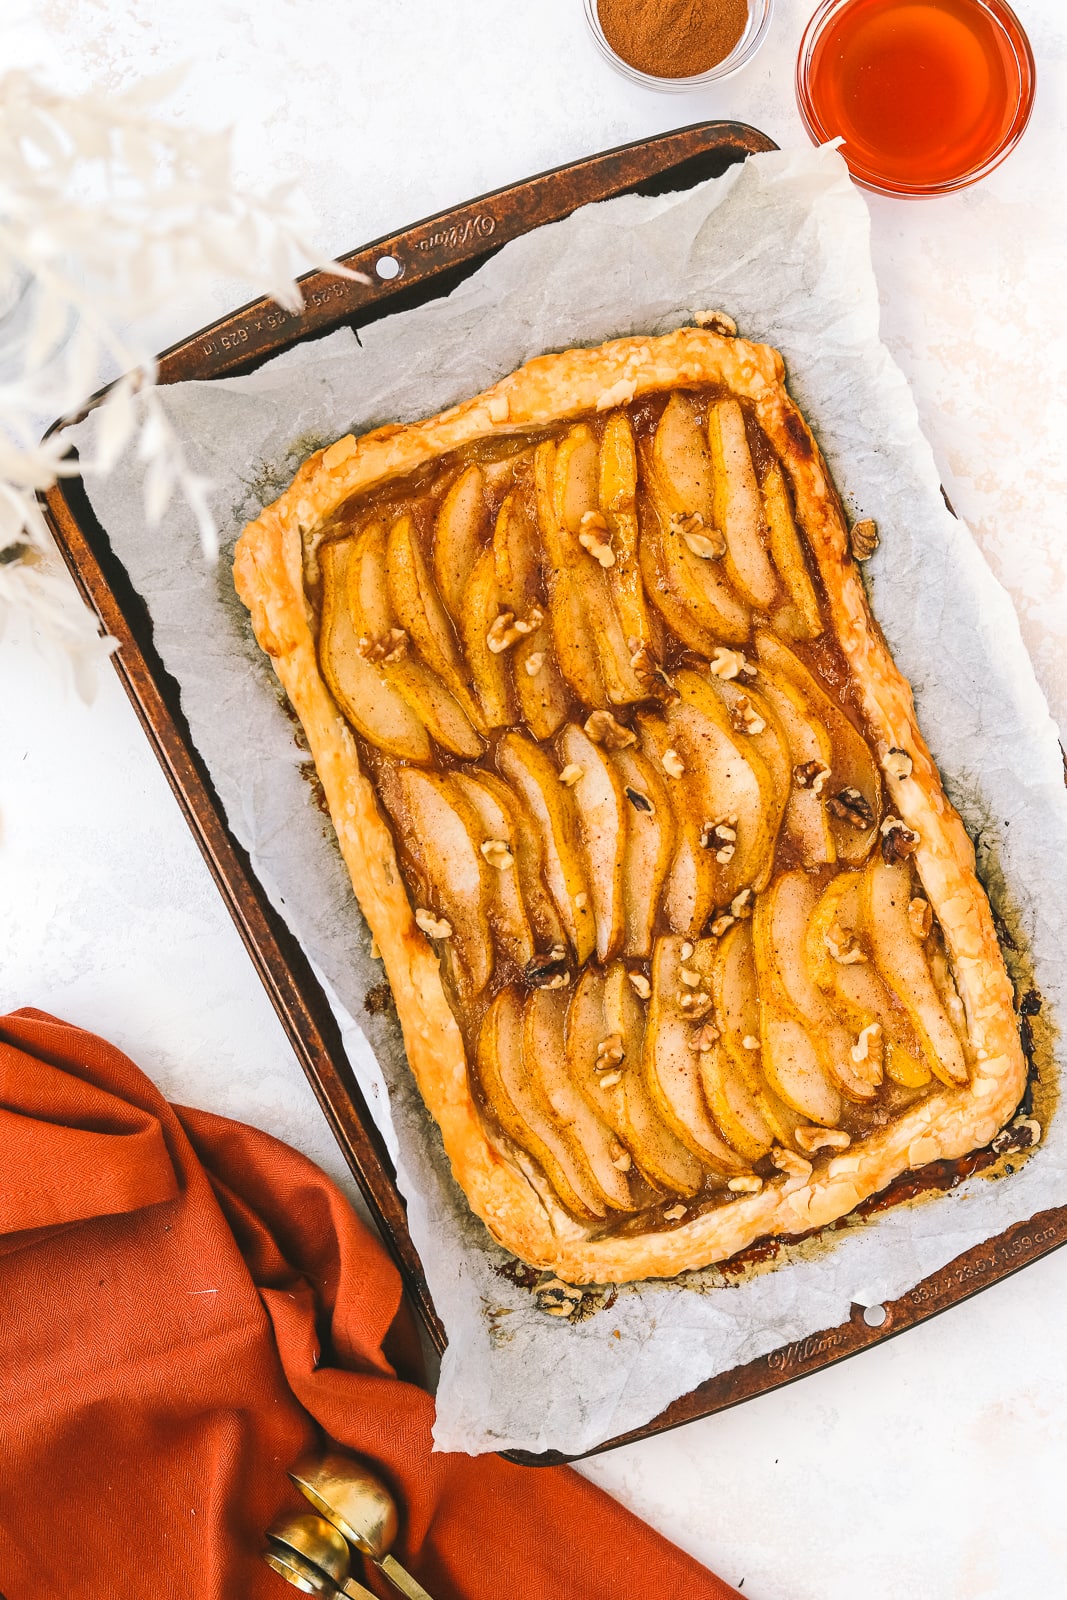 Quick & Easy Pear Tart made with puff pastry